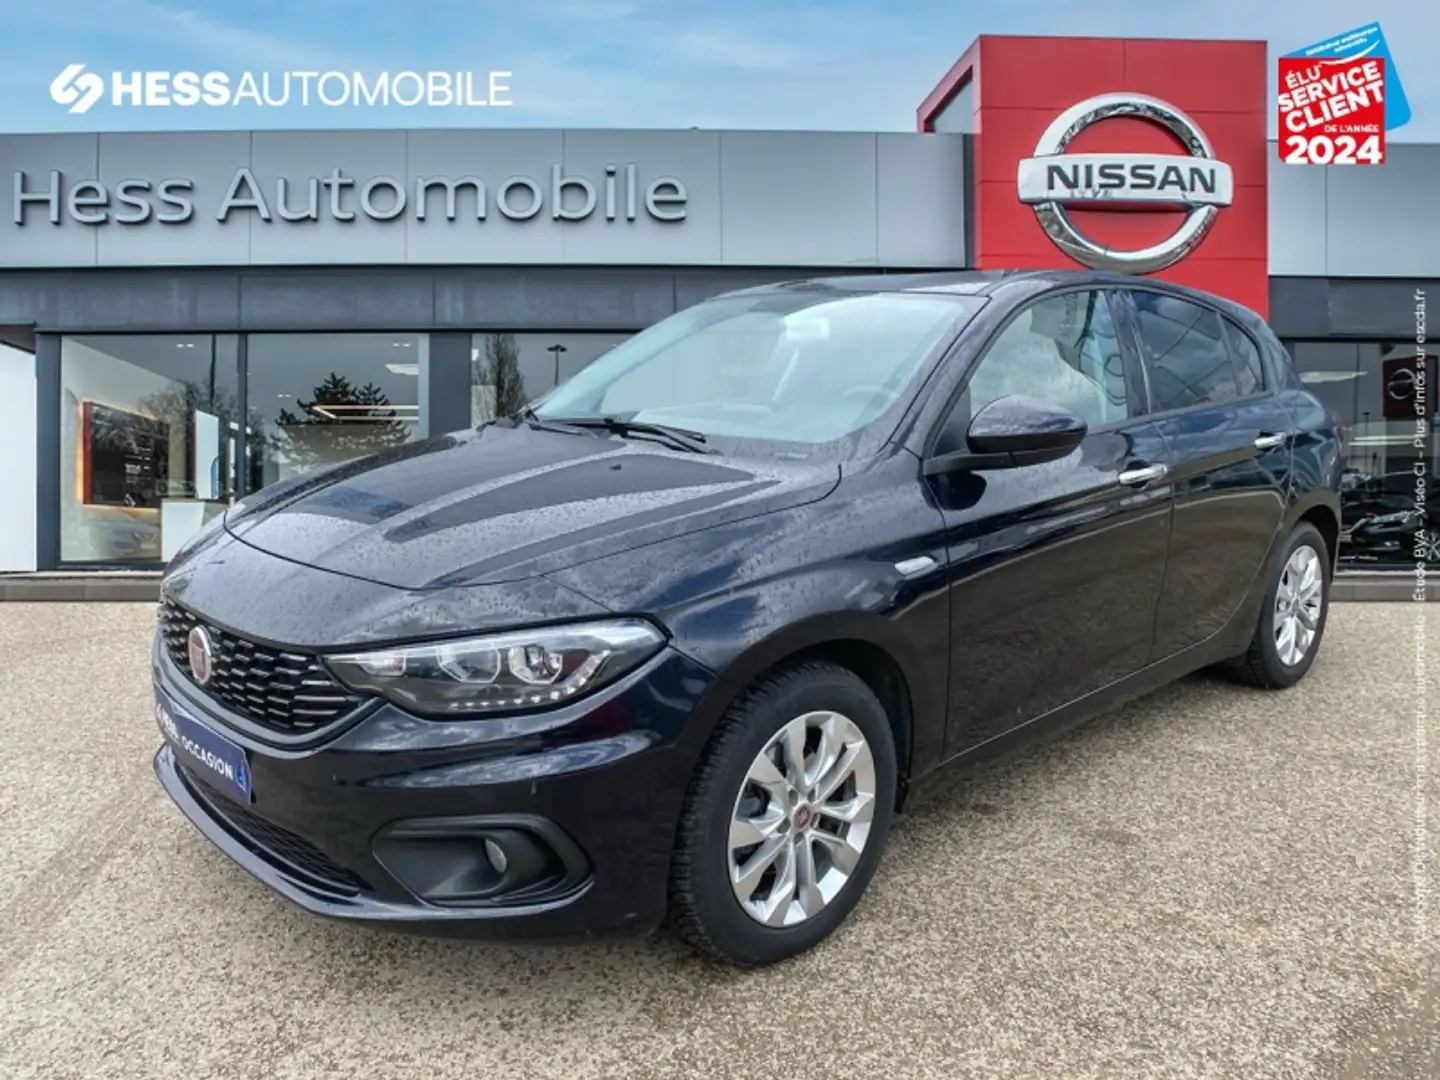 Fiat Tipo 1.6 MultiJet 120ch Lounge S/S MY19 110g 5p - 1